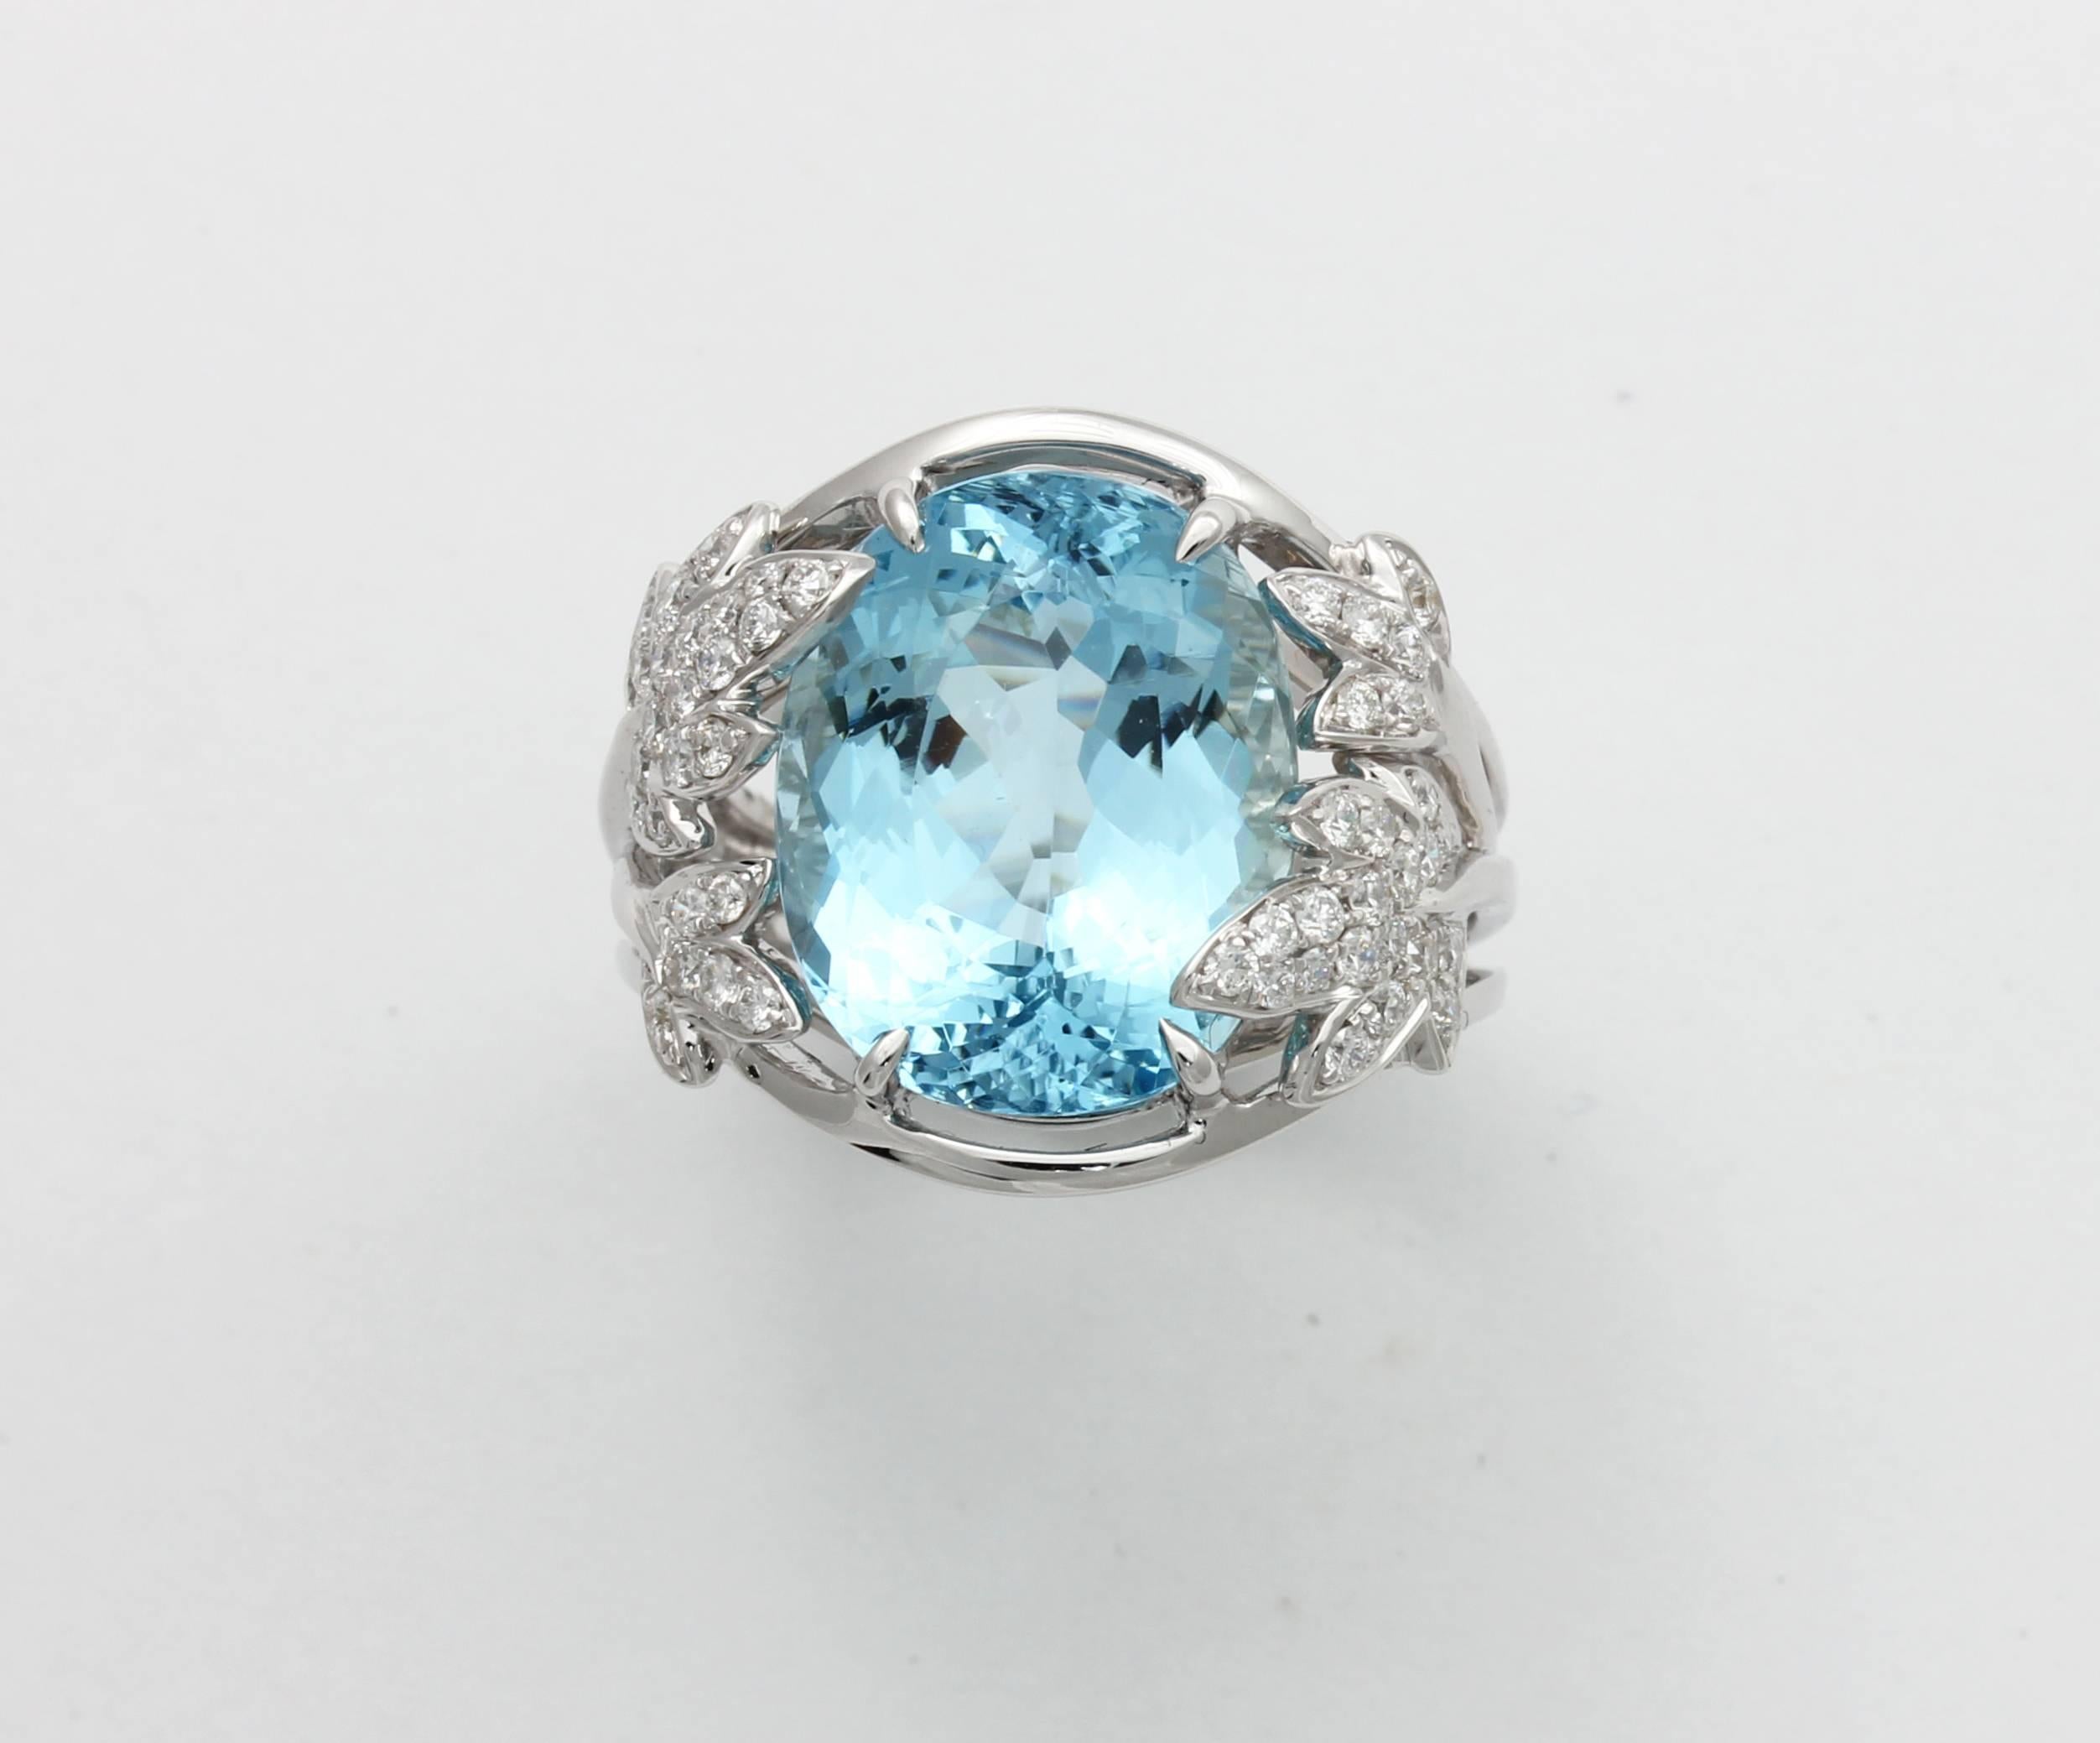 One-of-a-kind Frederic Sage oval Aquamarine ring with diamond leaf accents set in 18 karat white gold

Total Aquamarine weight: 9.89 ct
Total diamond count: 50
Total diamond weight: 0.60 ct
Finger size: 7